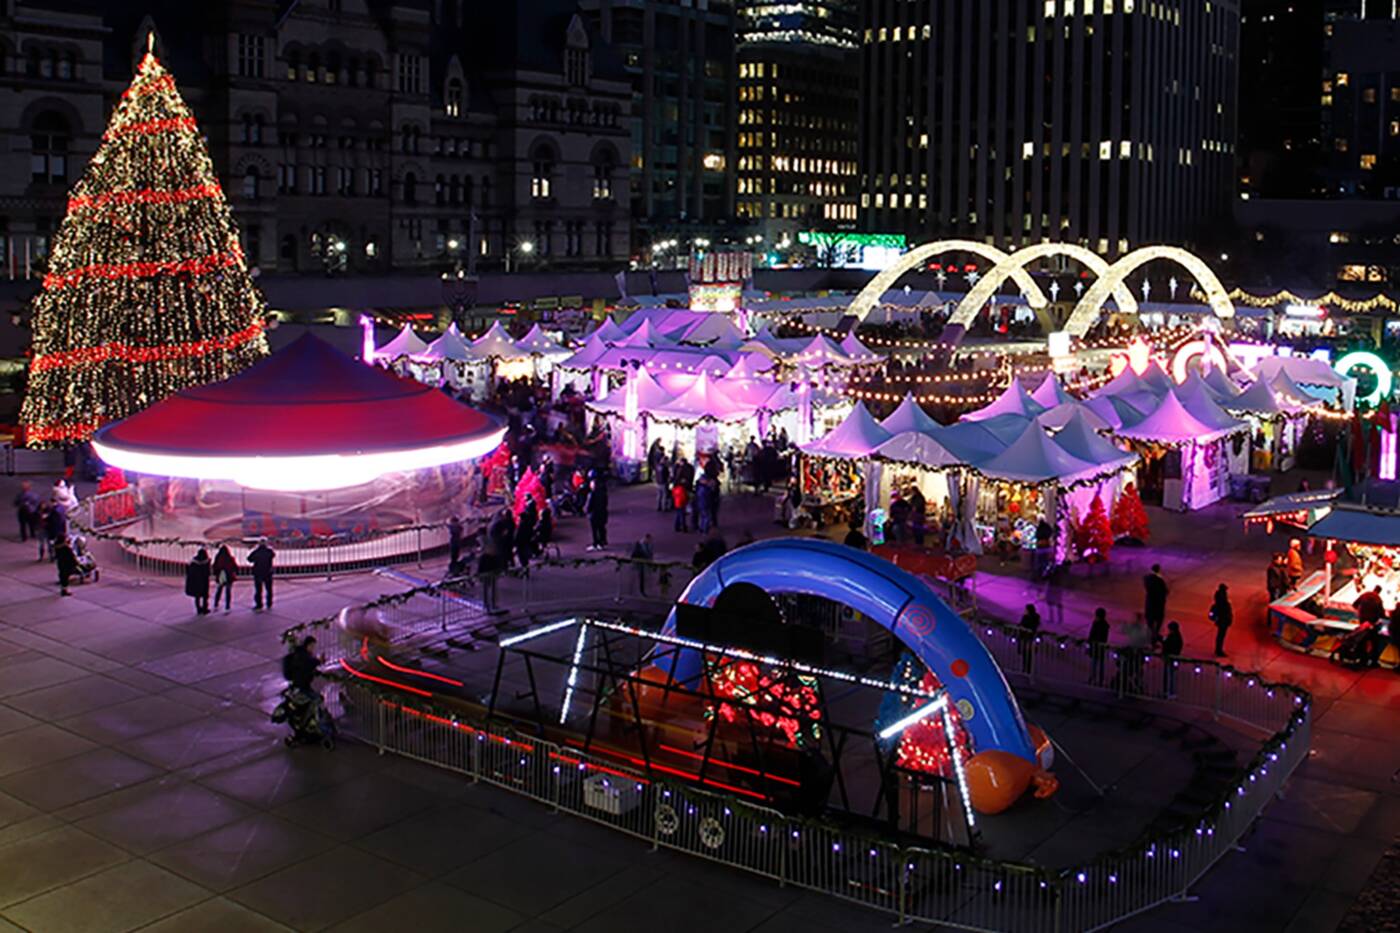 A magical holiday market is coming to downtown Toronto all December long